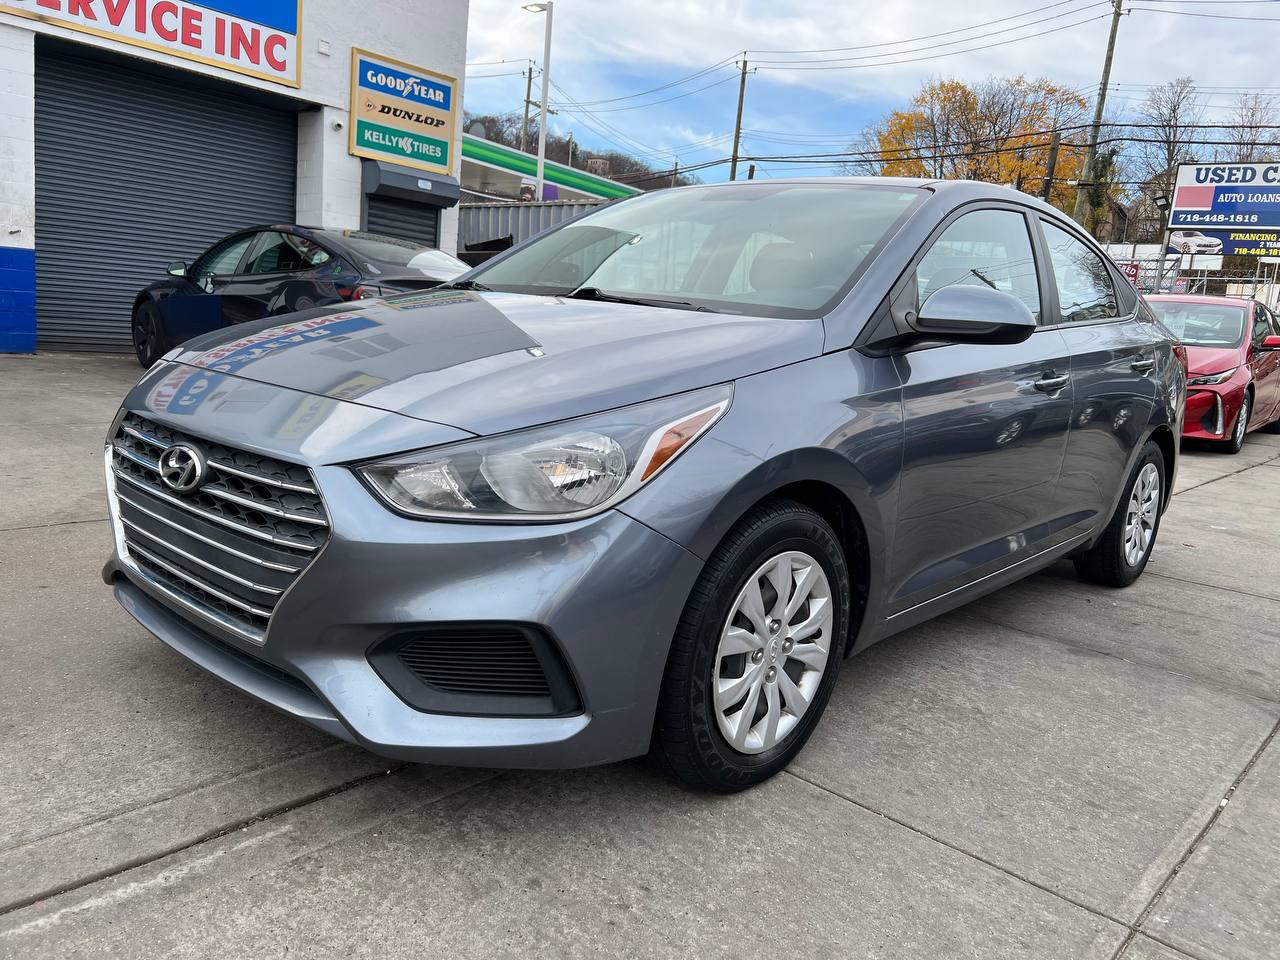 Used Car - 2019 Hyundai Accent SE for Sale in Staten Island, NY